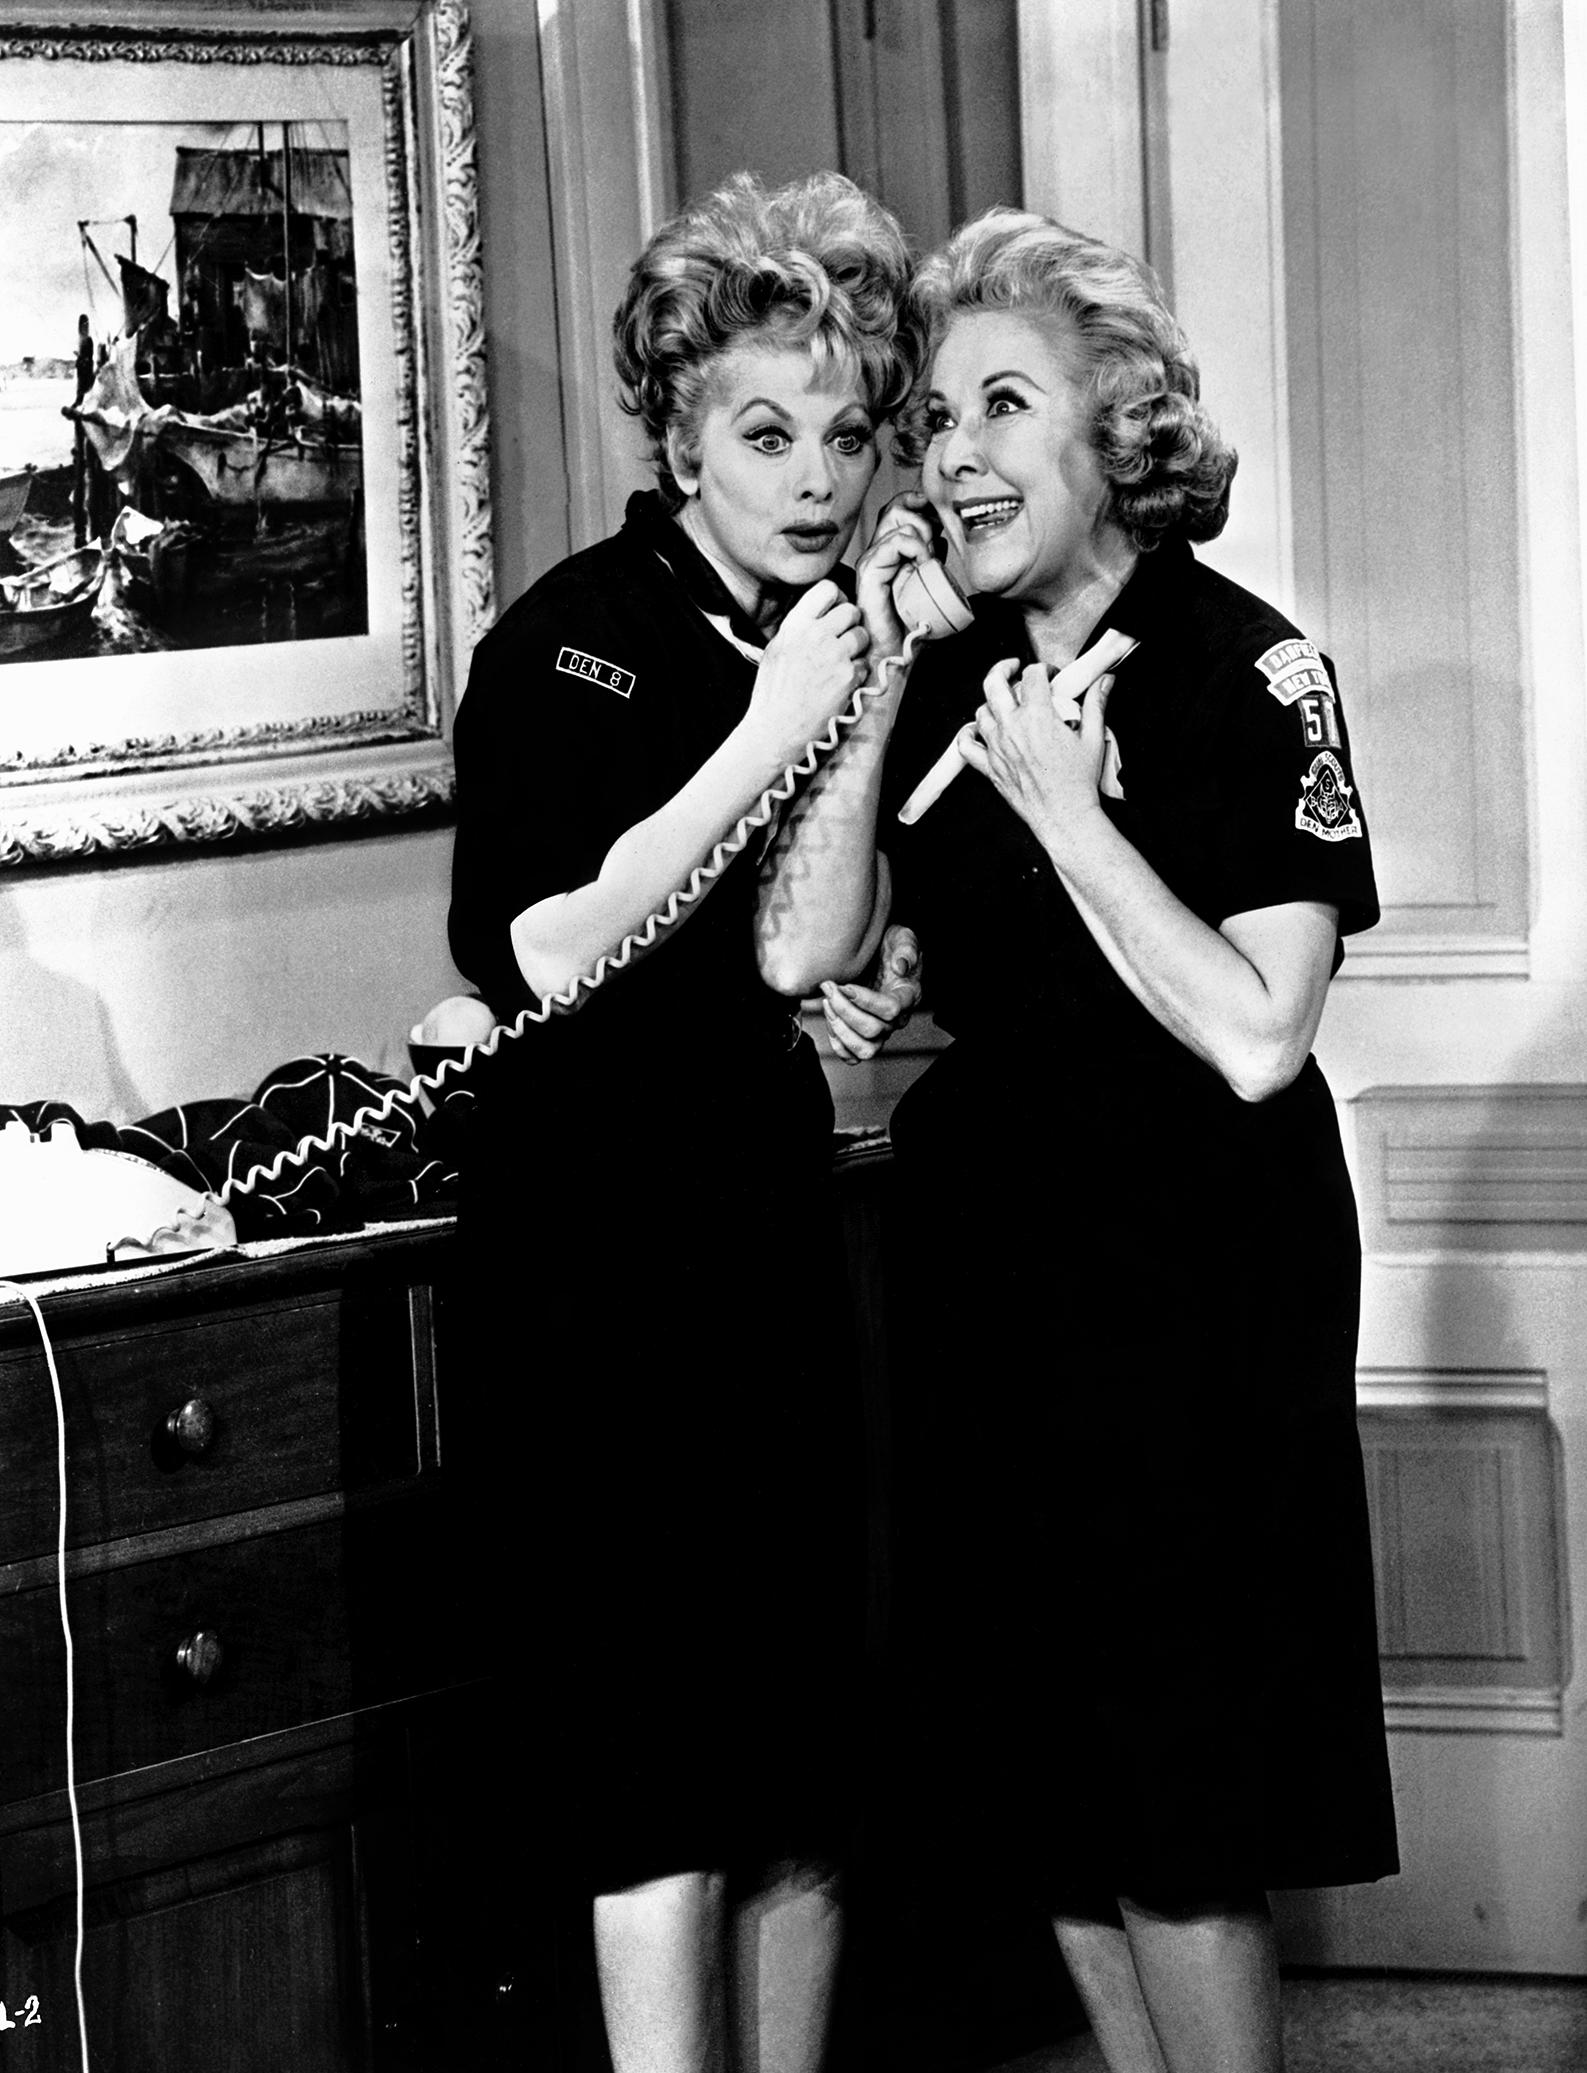 Unknown Portrait Photograph - Lucille Ball and Vivian Vance "I Love Lucy"